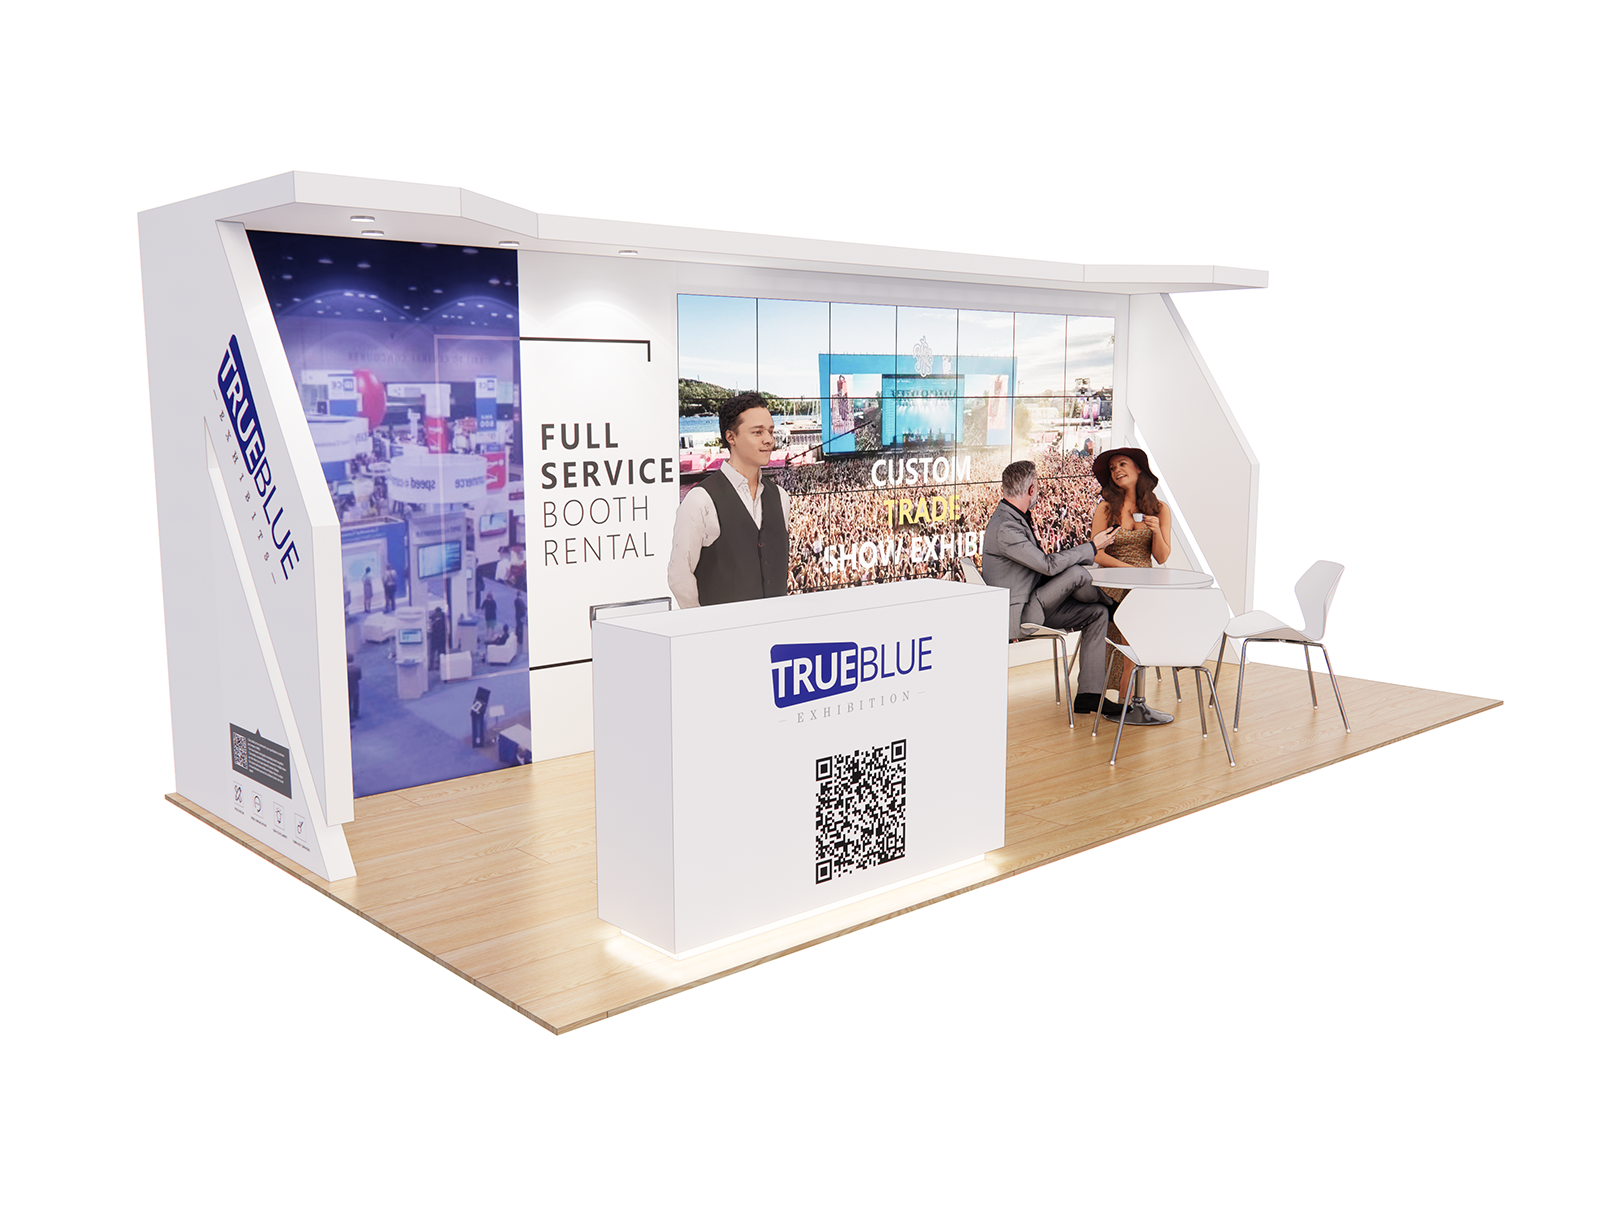 R34 10′ x 20′ Custom Trade Show Booth With LED Video Wall